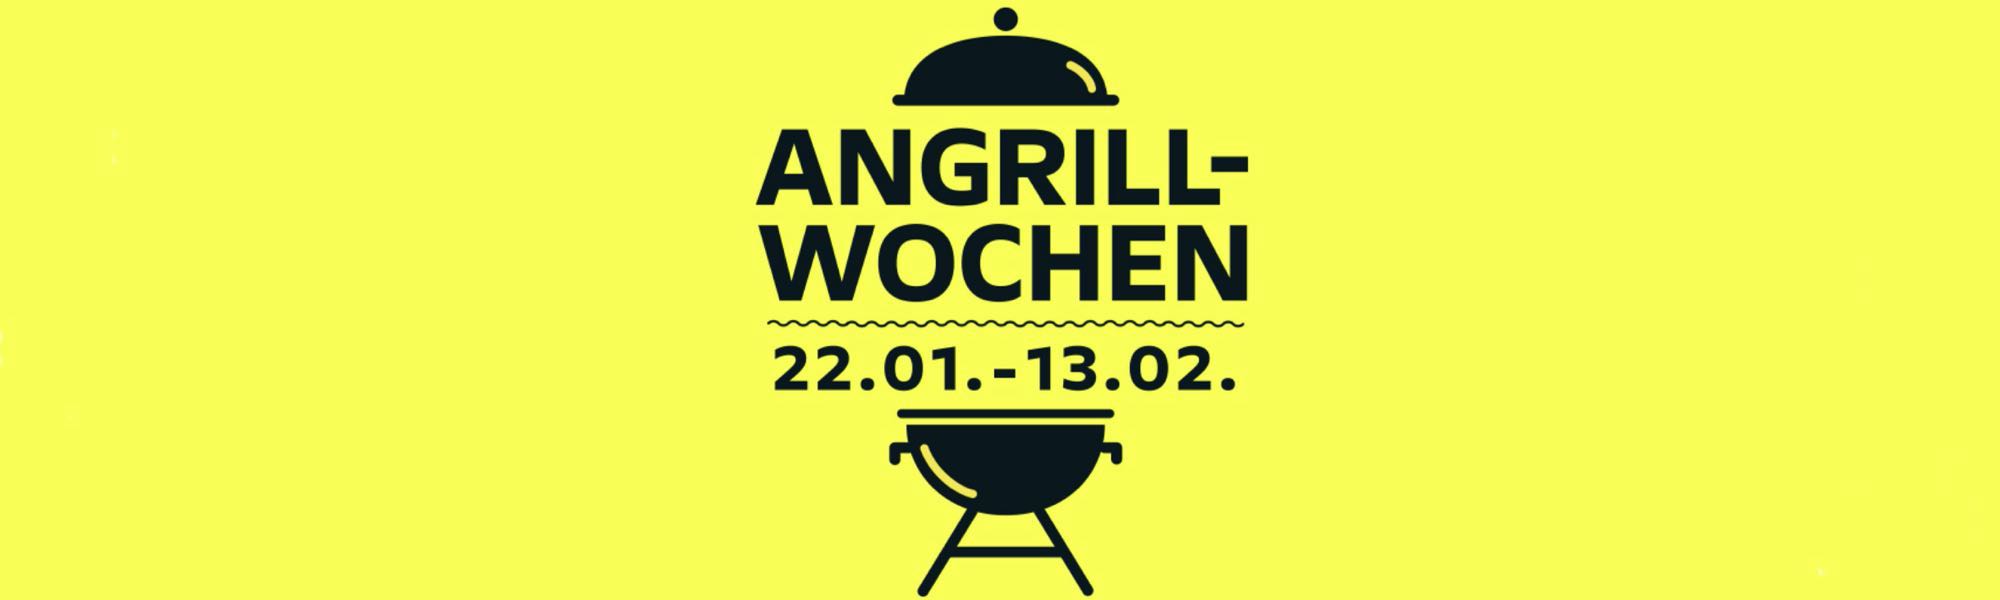 Angrill-Wochen